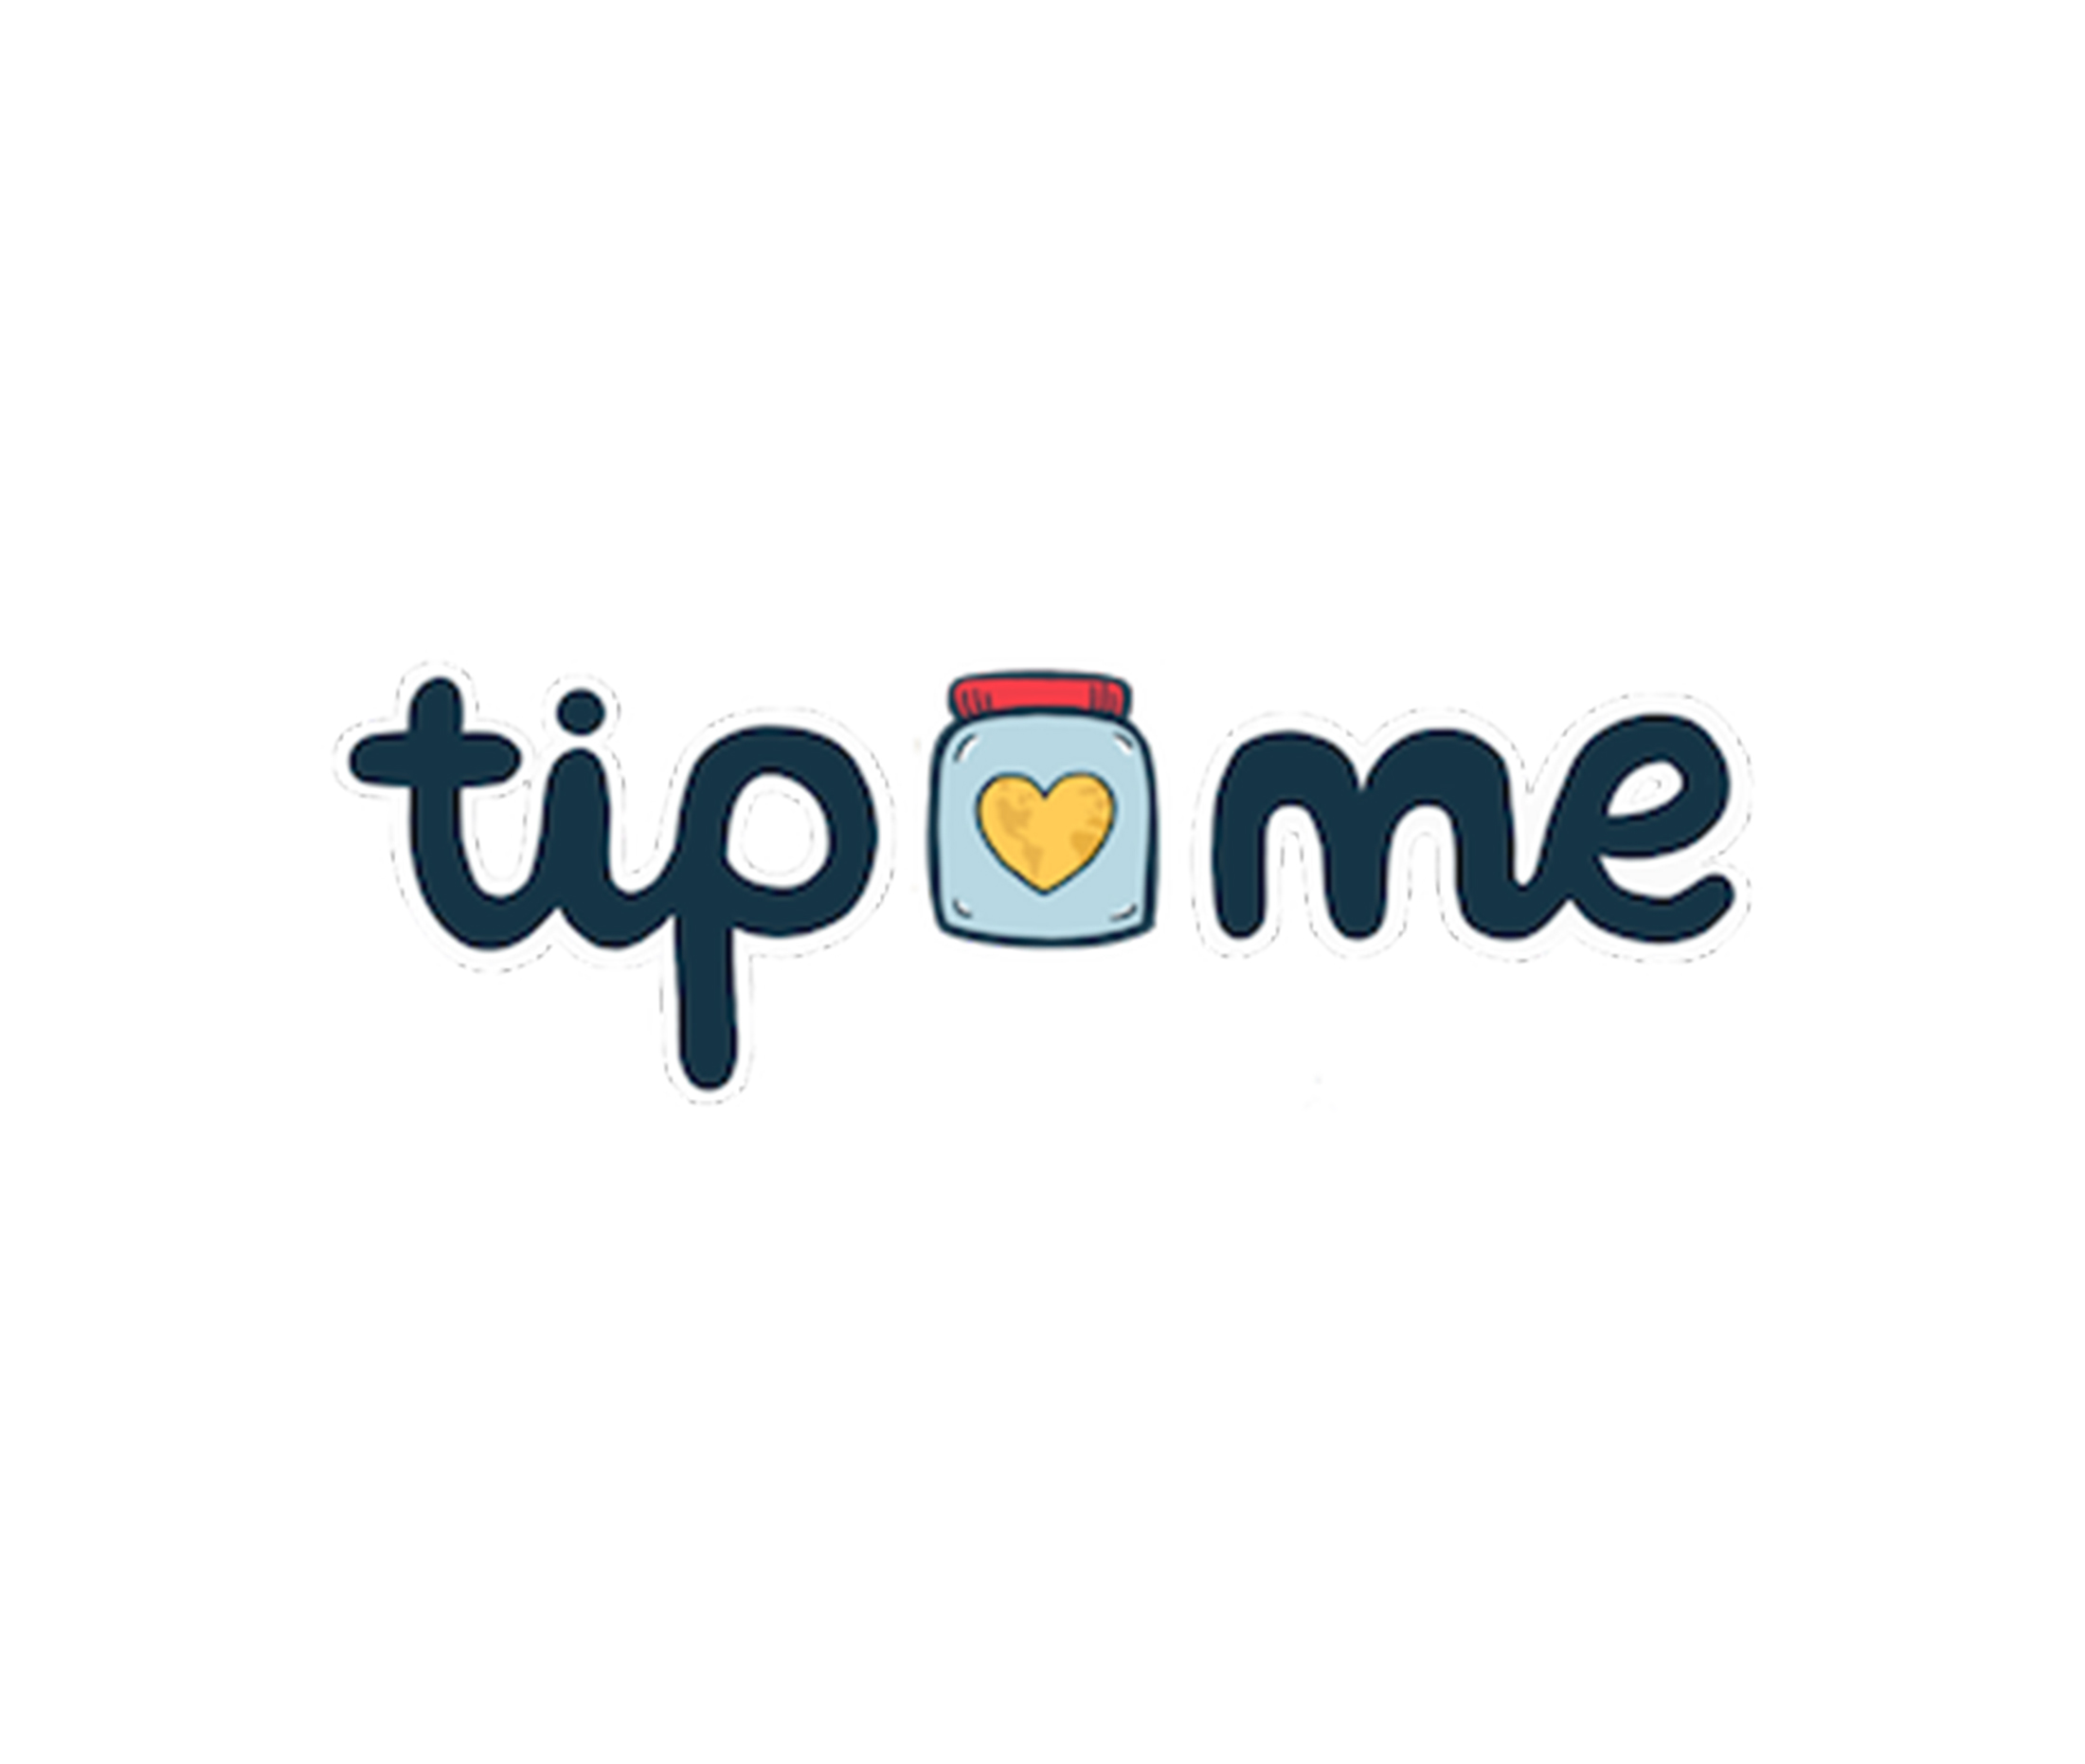 Cooperation with Tip me - Amazon supports equality of people worldwide with digital innovation